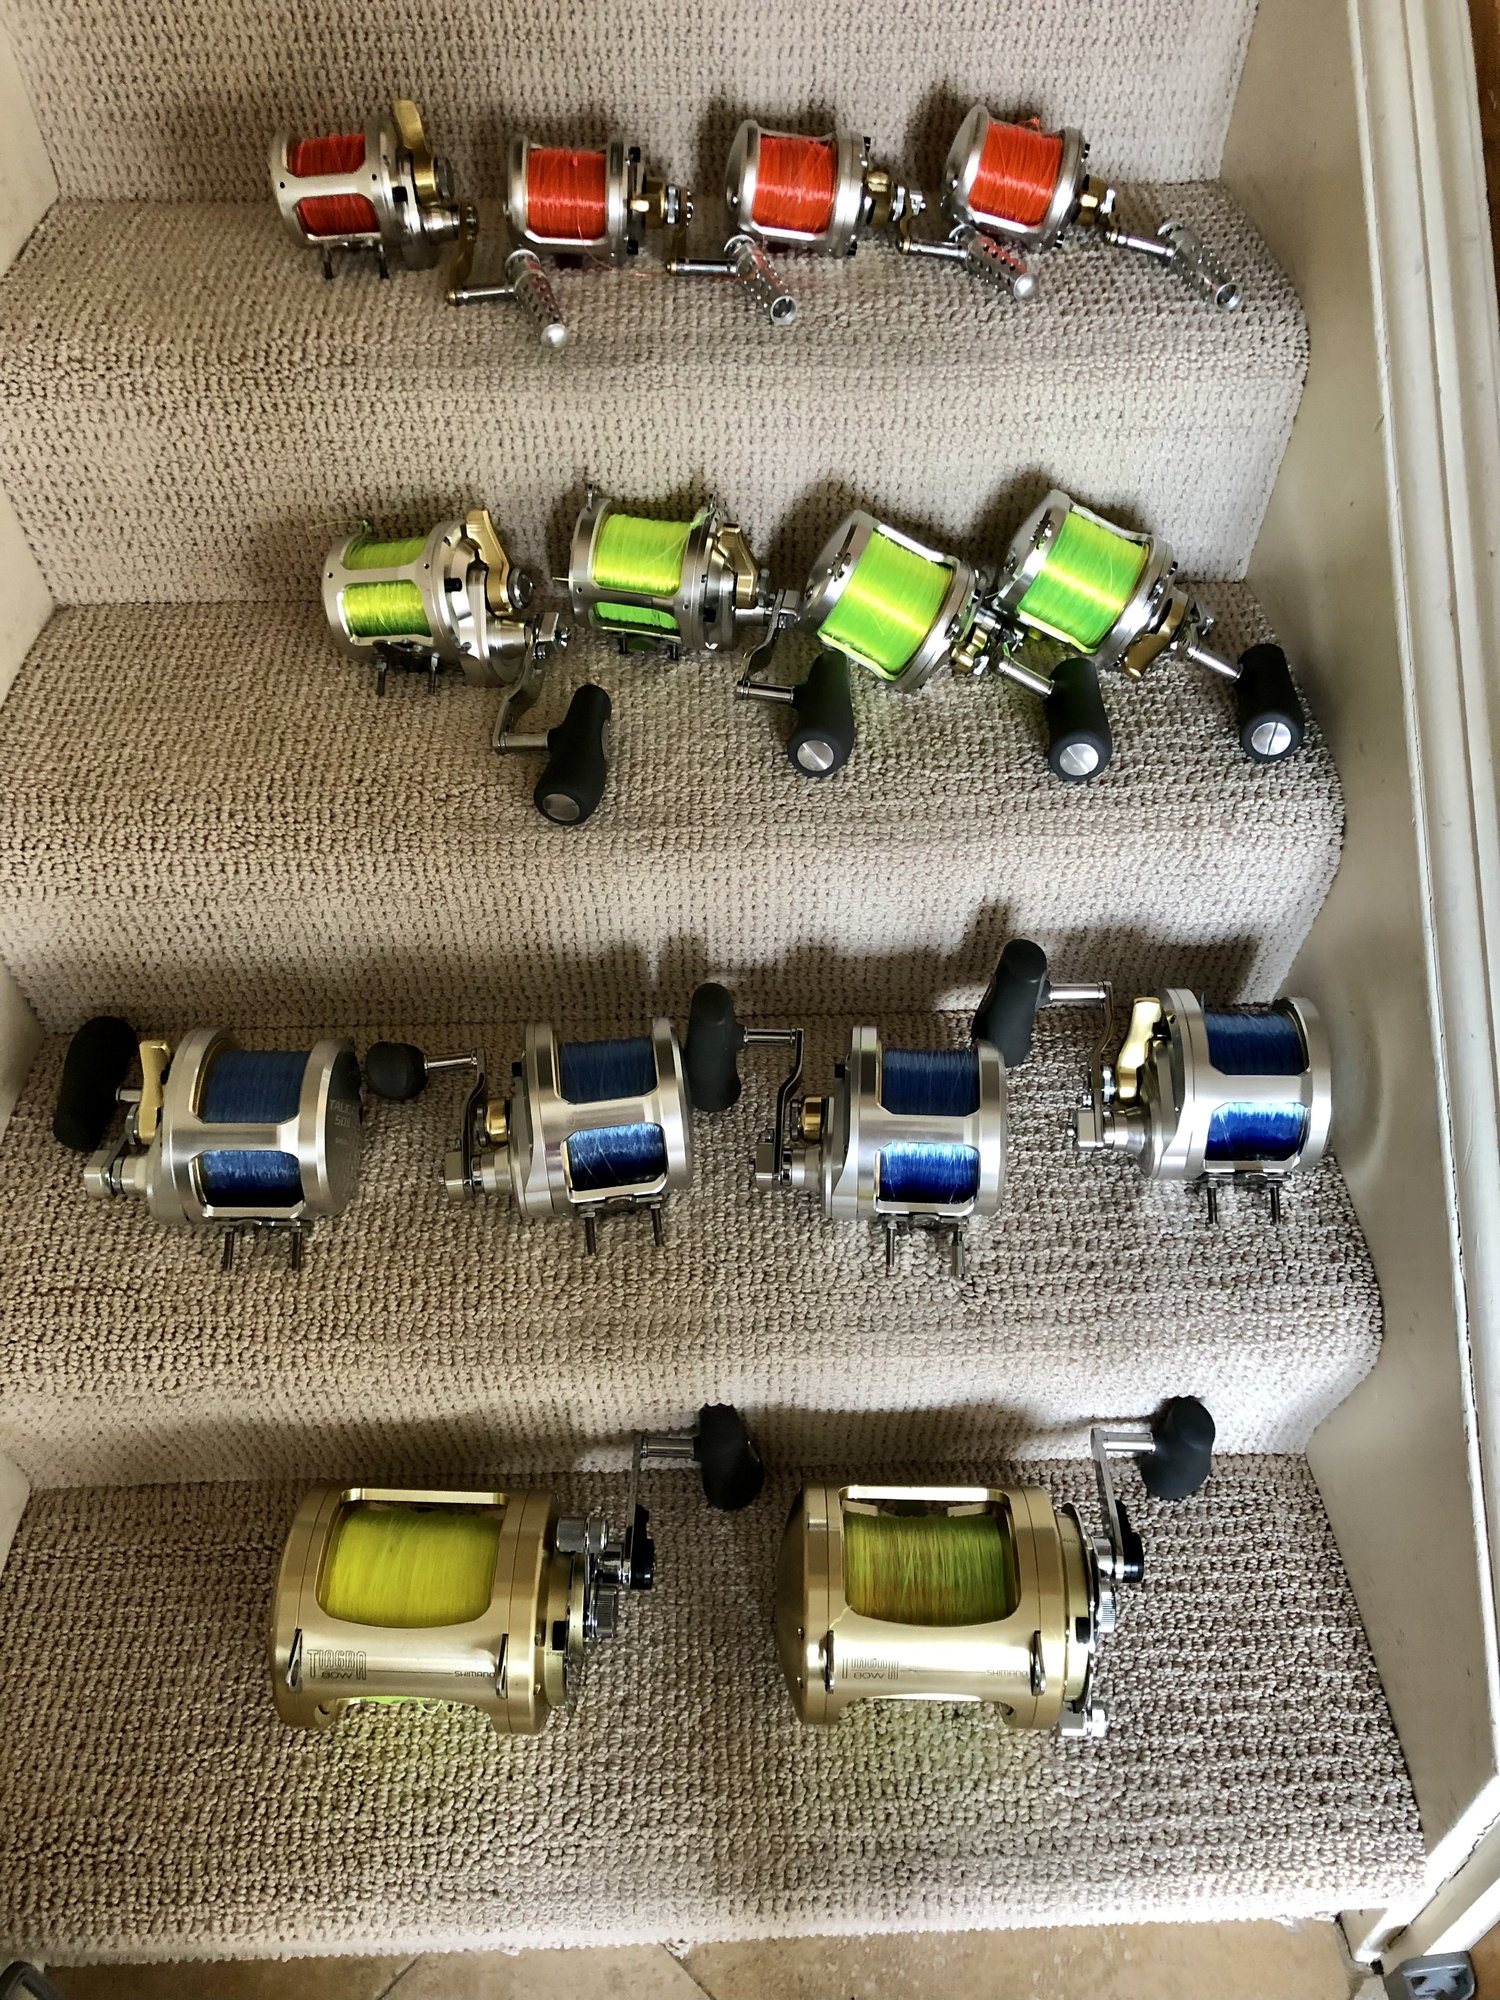 Shimano reel repair? - Page 2 - The Hull Truth - Boating and Fishing Forum